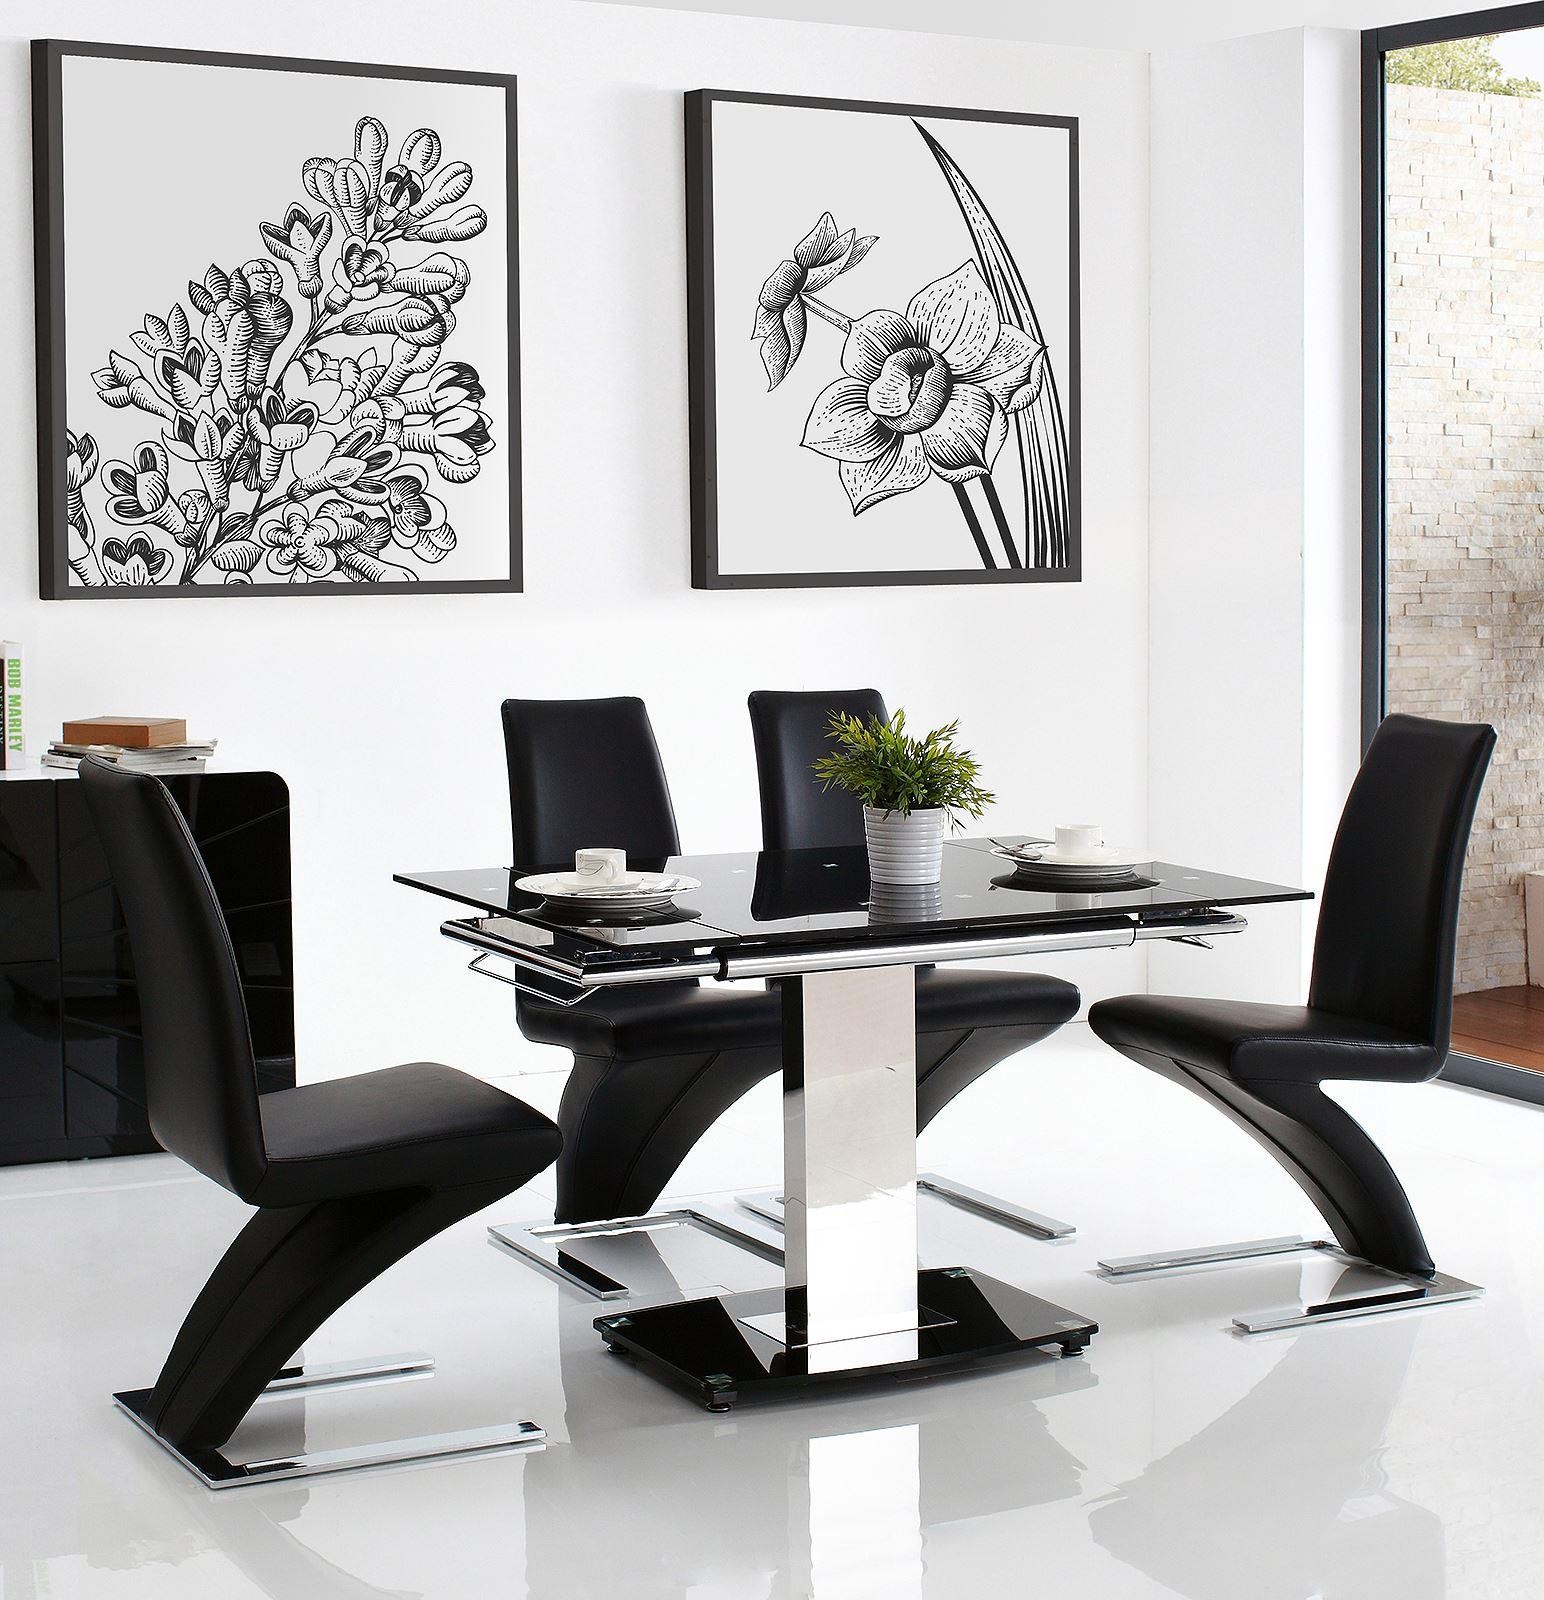 Enzo 80-120cm Extending Glass Dining Table with 6 Zed Designer Dining Chairs [Black]